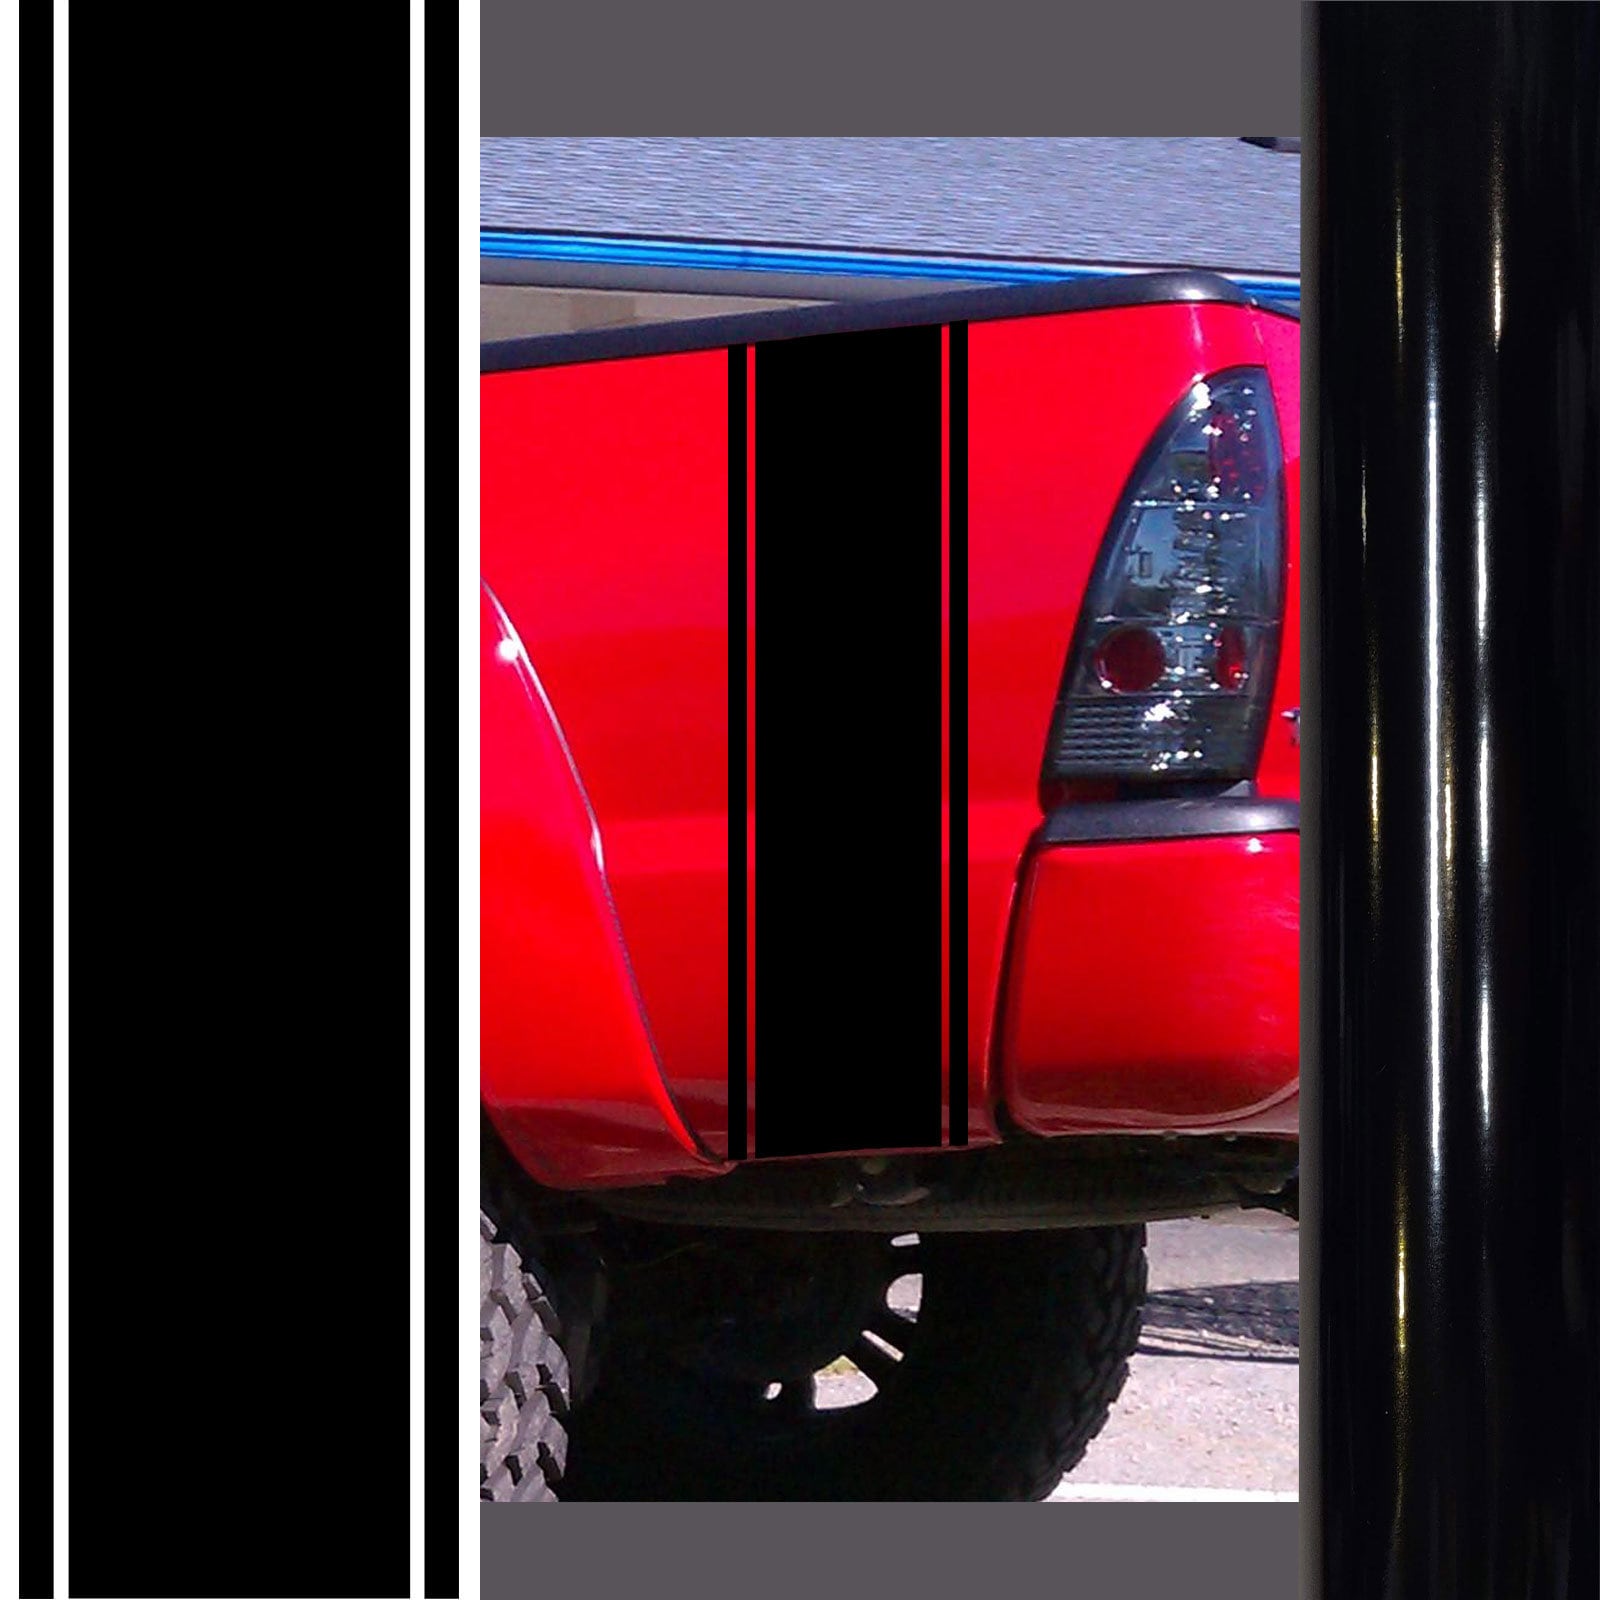 2 Base Rear Bed Vinyl Decals For Dodge Ram Ford Toyota Or Any Other Pickup Truck